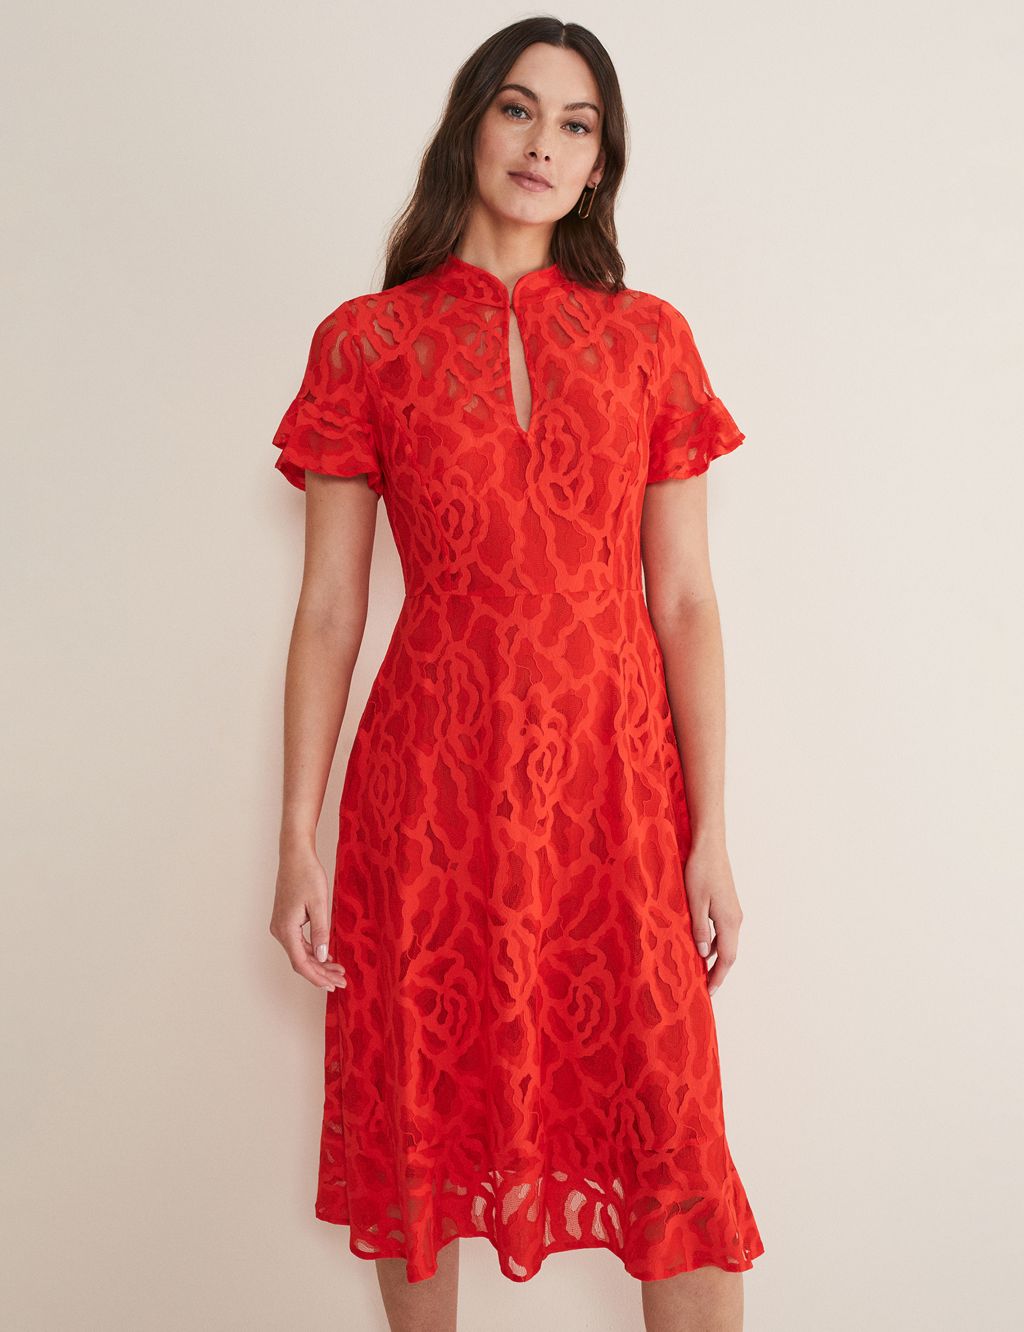 Lace High Neck Knee Length Tailored Dress image 1